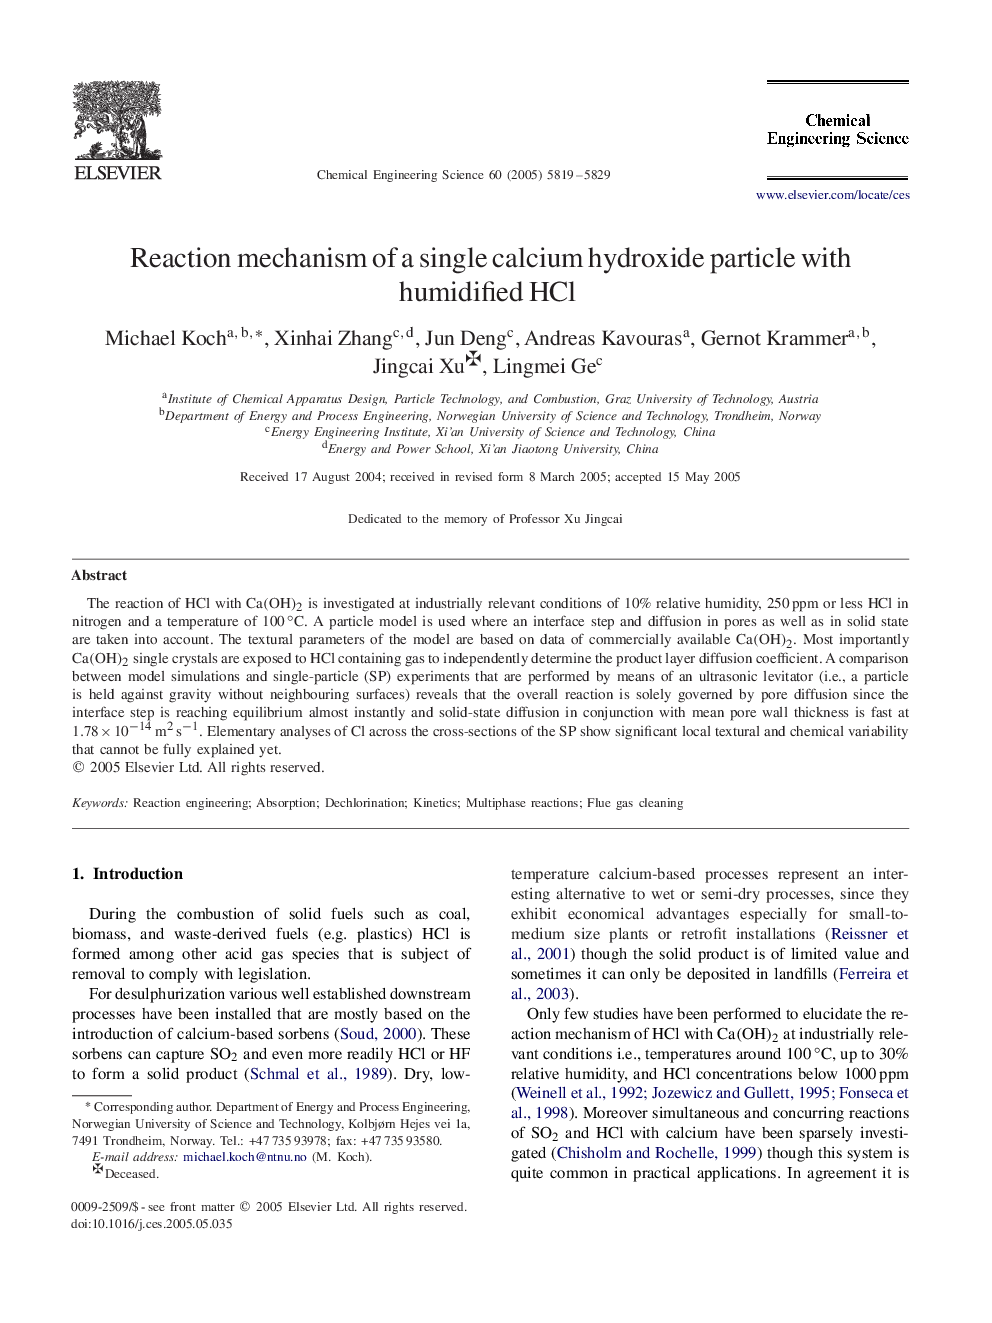 Reaction mechanism of a single calcium hydroxide particle with humidified HCl